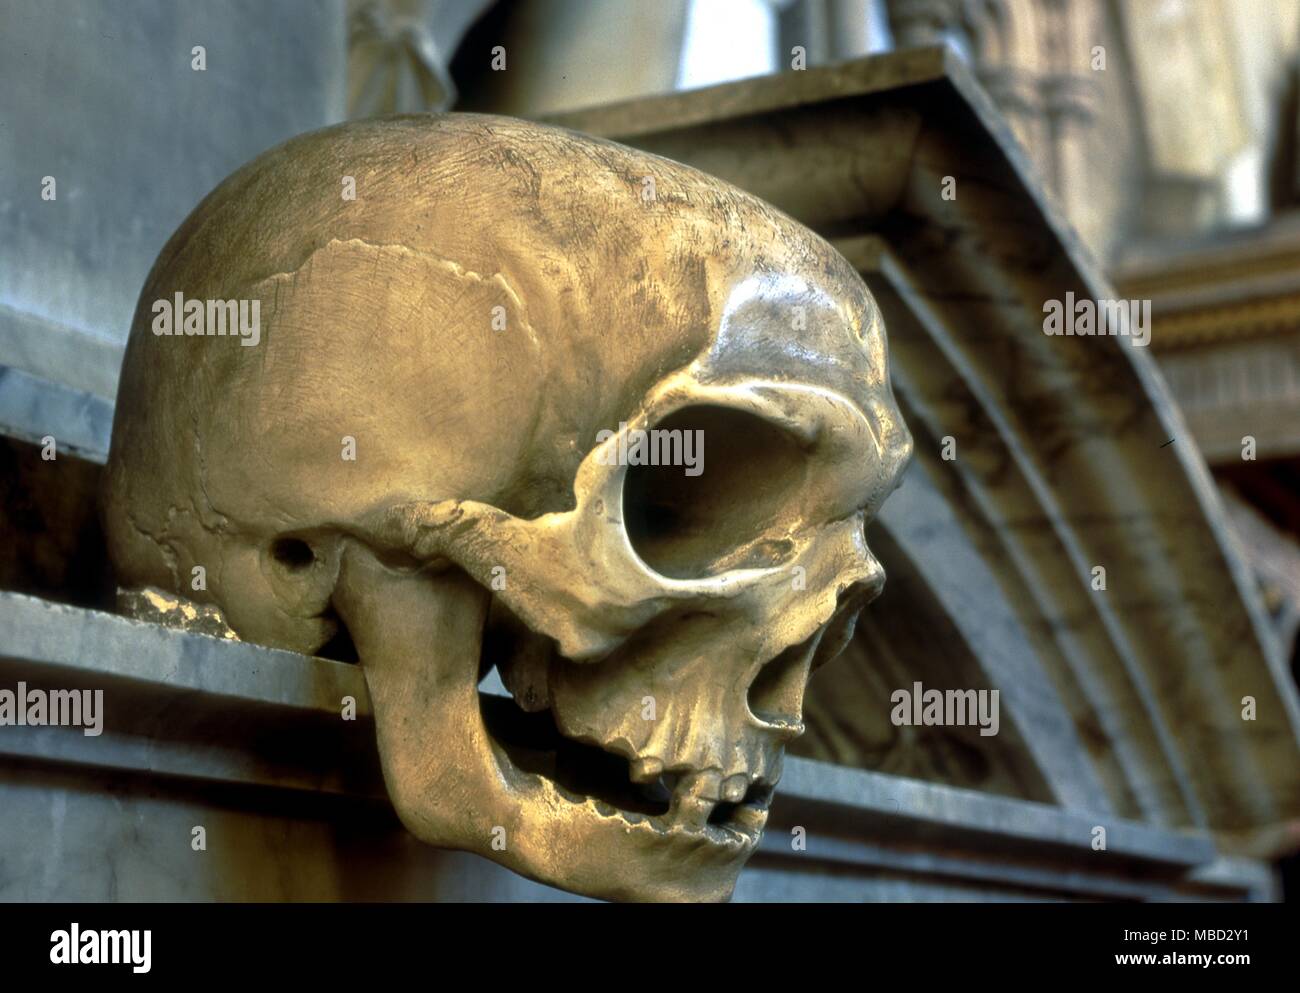 Skull as a finial on the sarcophagus of the Manners family in the church of St Mary the Virgin, Bottesford. 17th century. Stock Photo